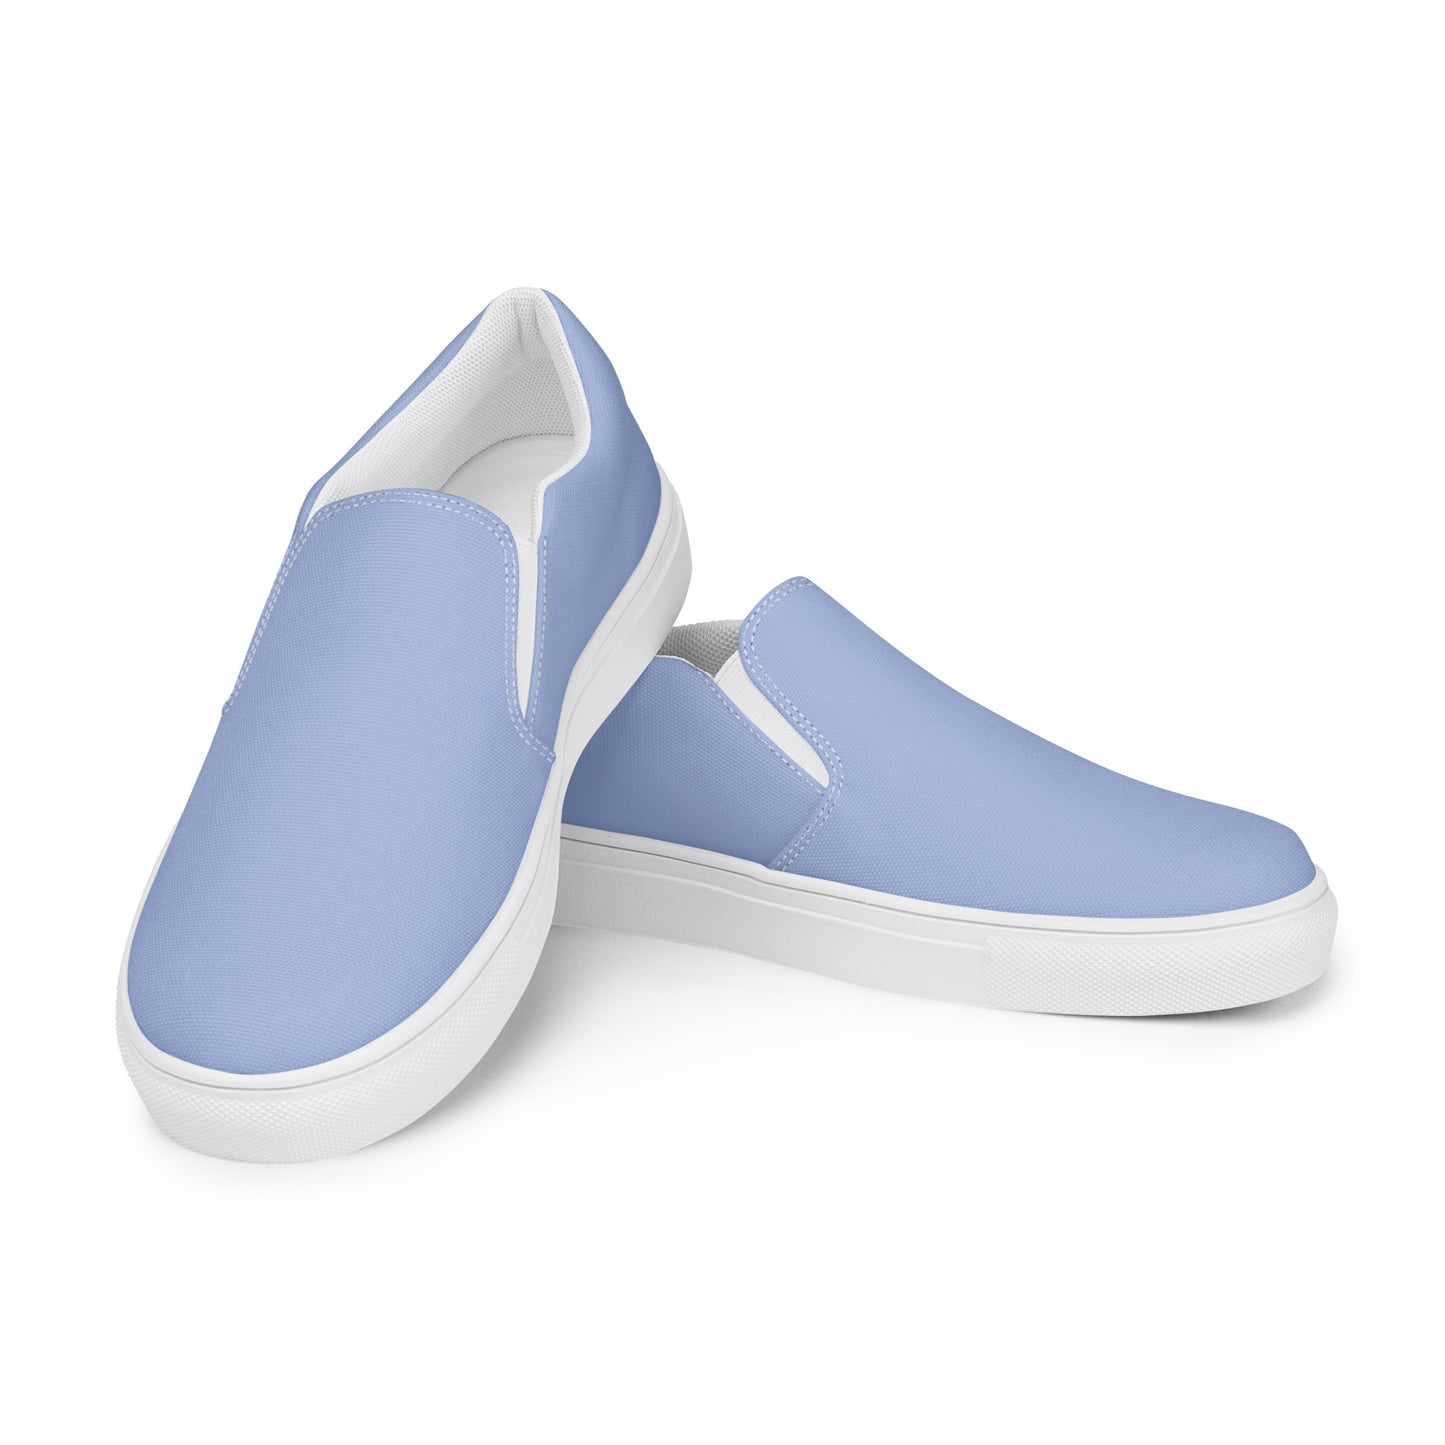 Cornflowers - Sustainably Made Women's  Slip-On Canvas Shoes